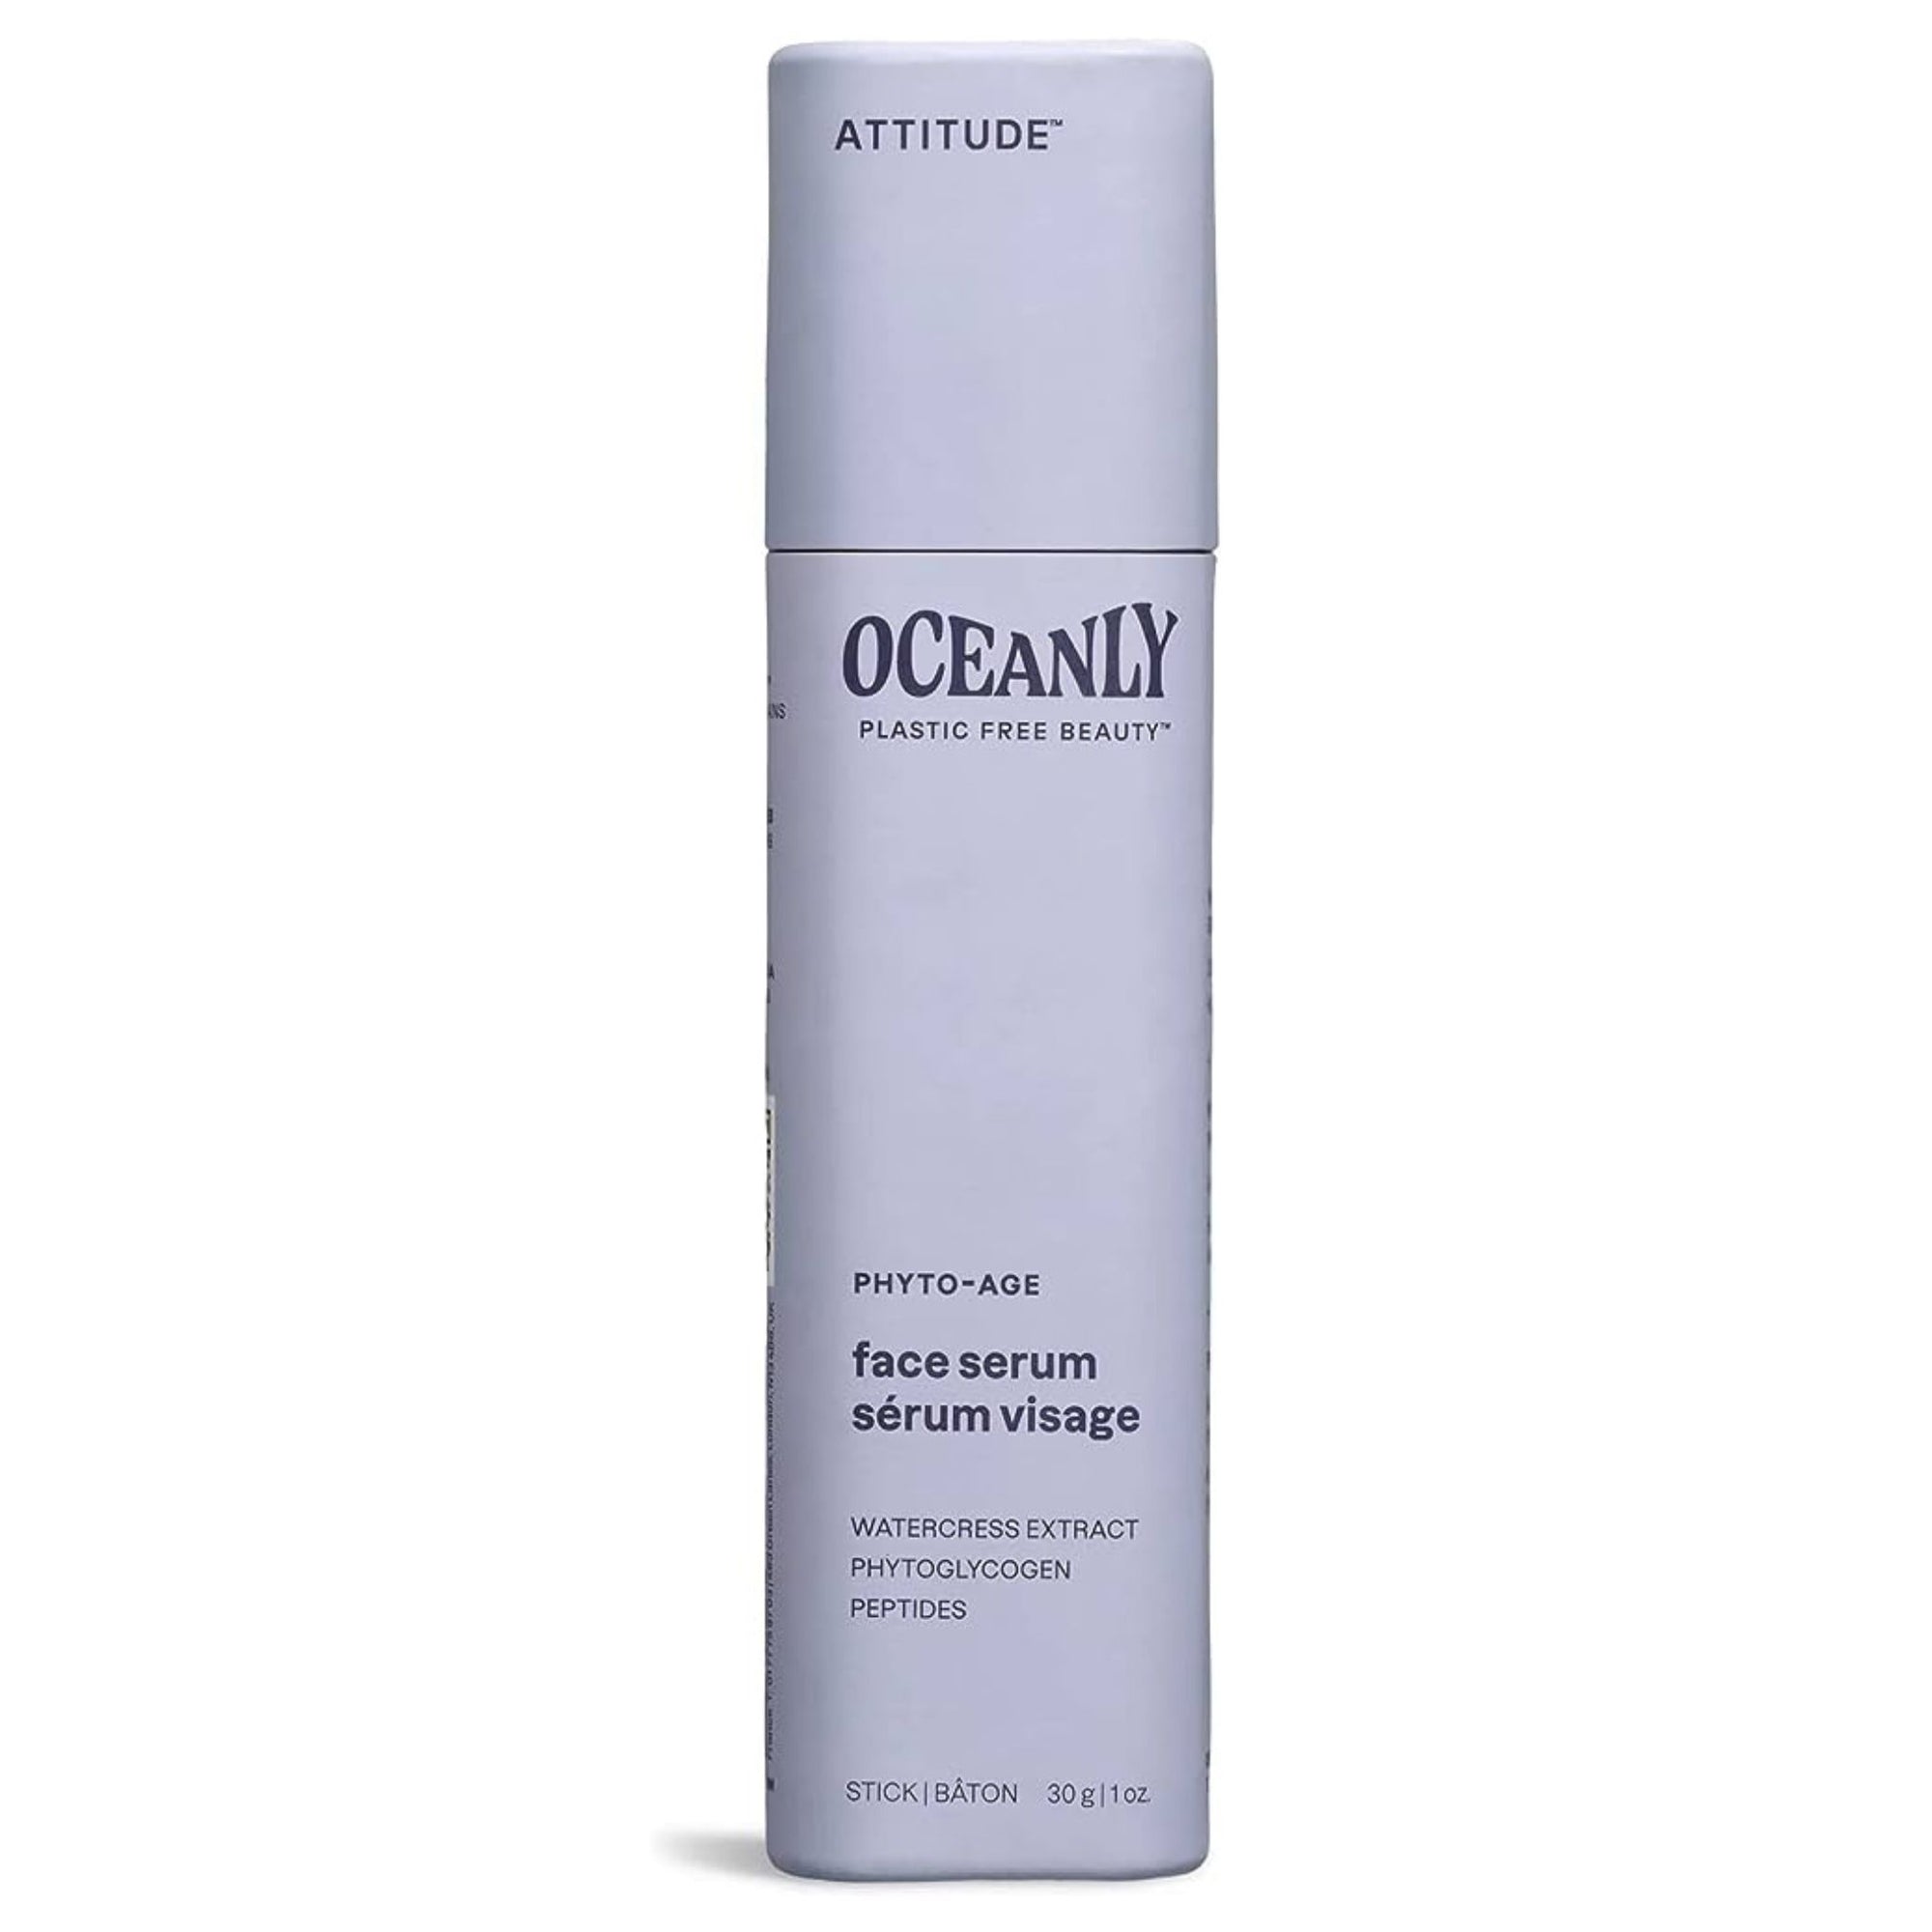 Oceanly Anti-Aging Solid Face Serum 30g